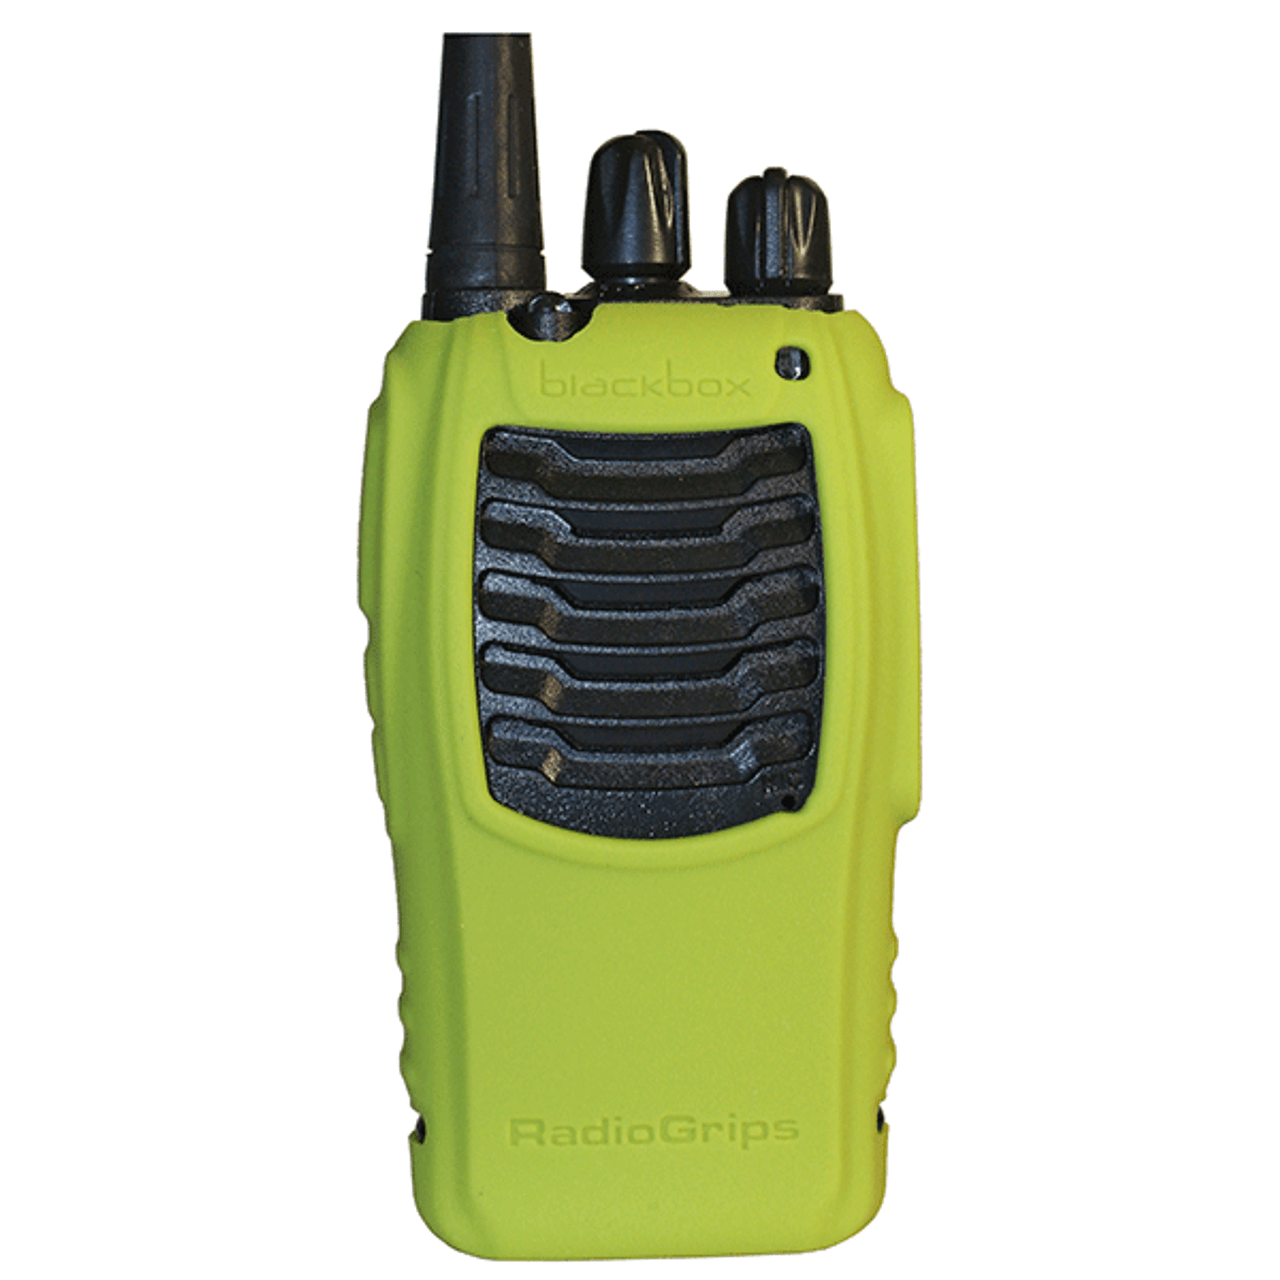 Silicone Case for Baofeng BF-888s Radio [[product_type]] kleinelectronics.com 19.95